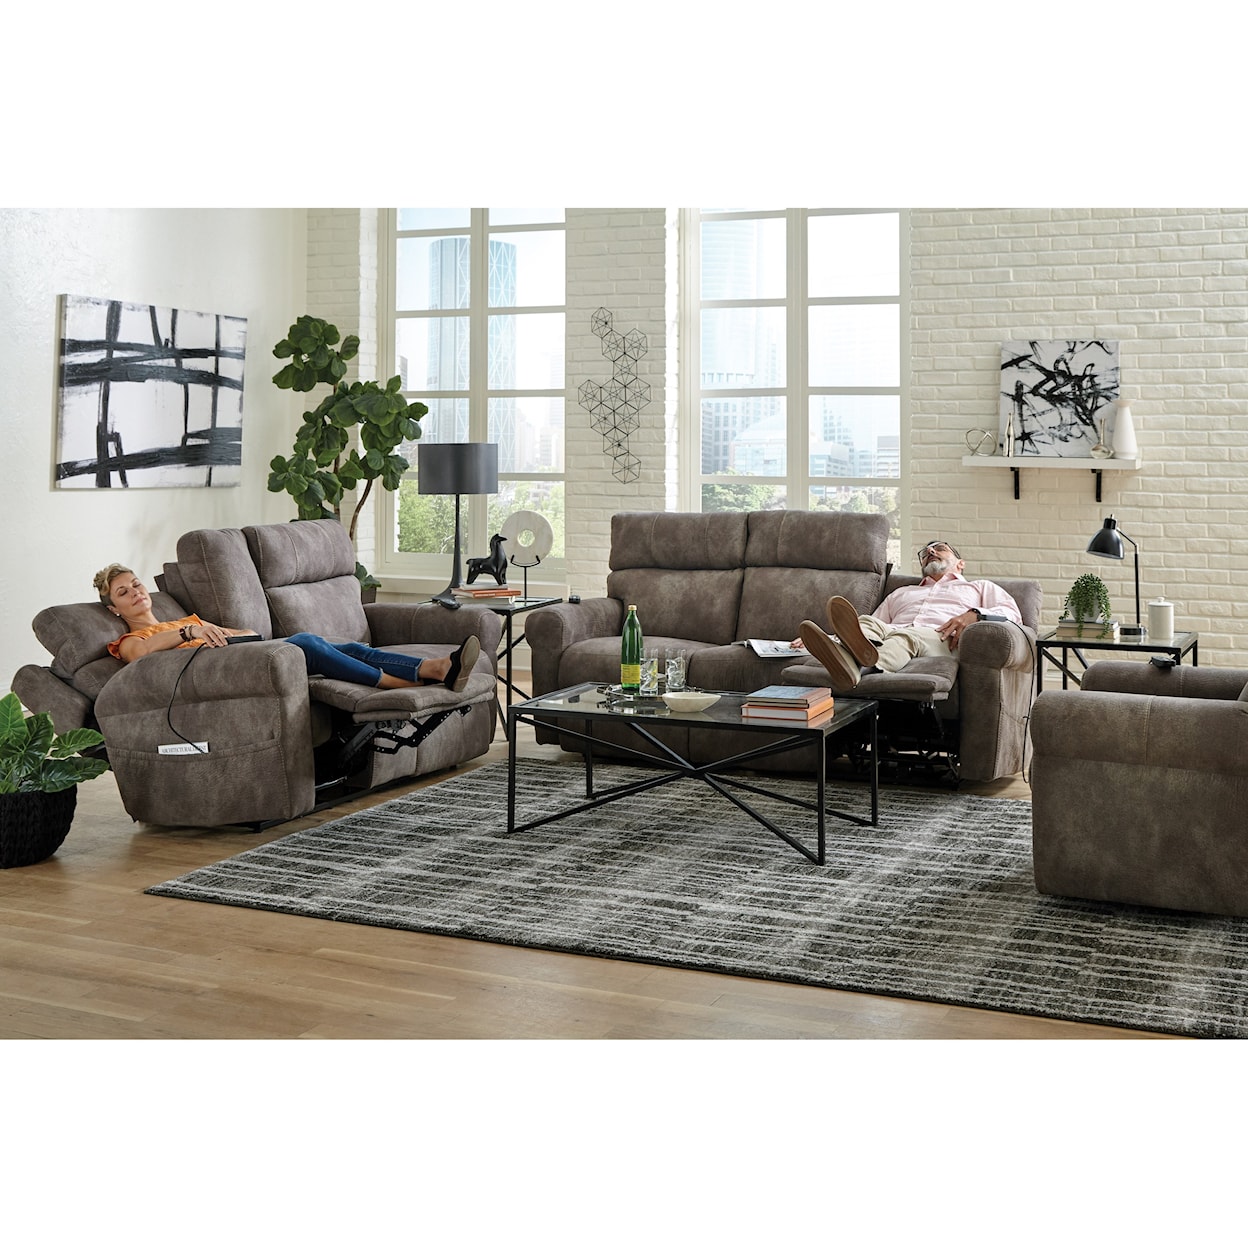 Catnapper 301 Tranquility Pwr Headrest Power Lay Flat Recl Sofa